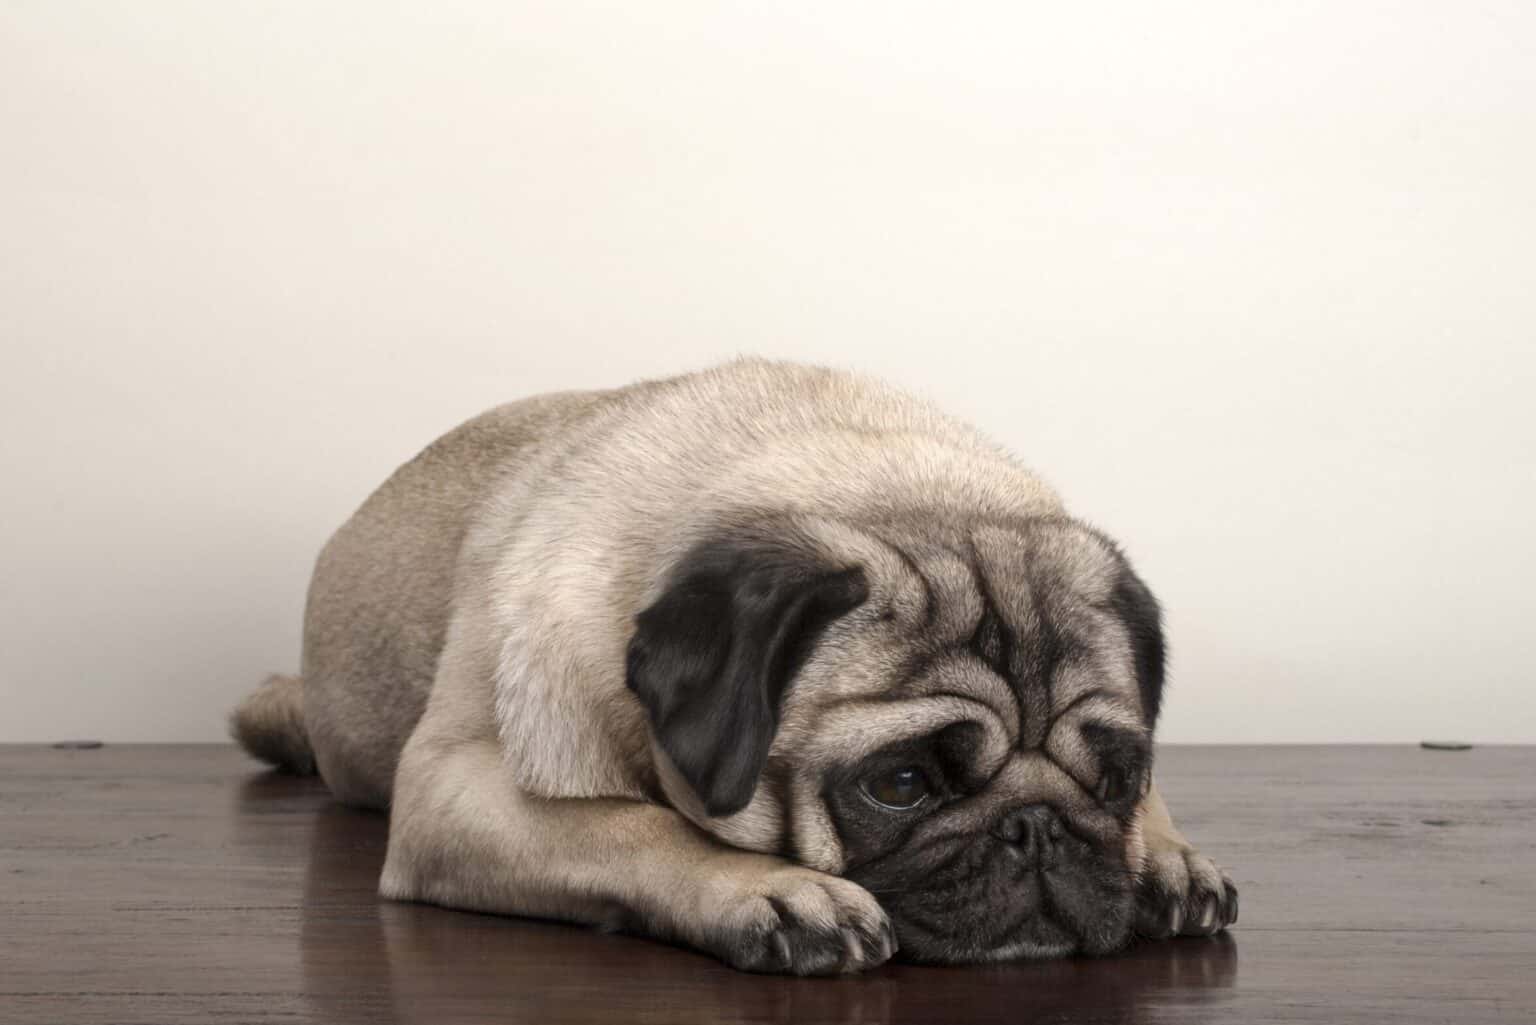 What Does it Mean When a Pug's Tail is Down?